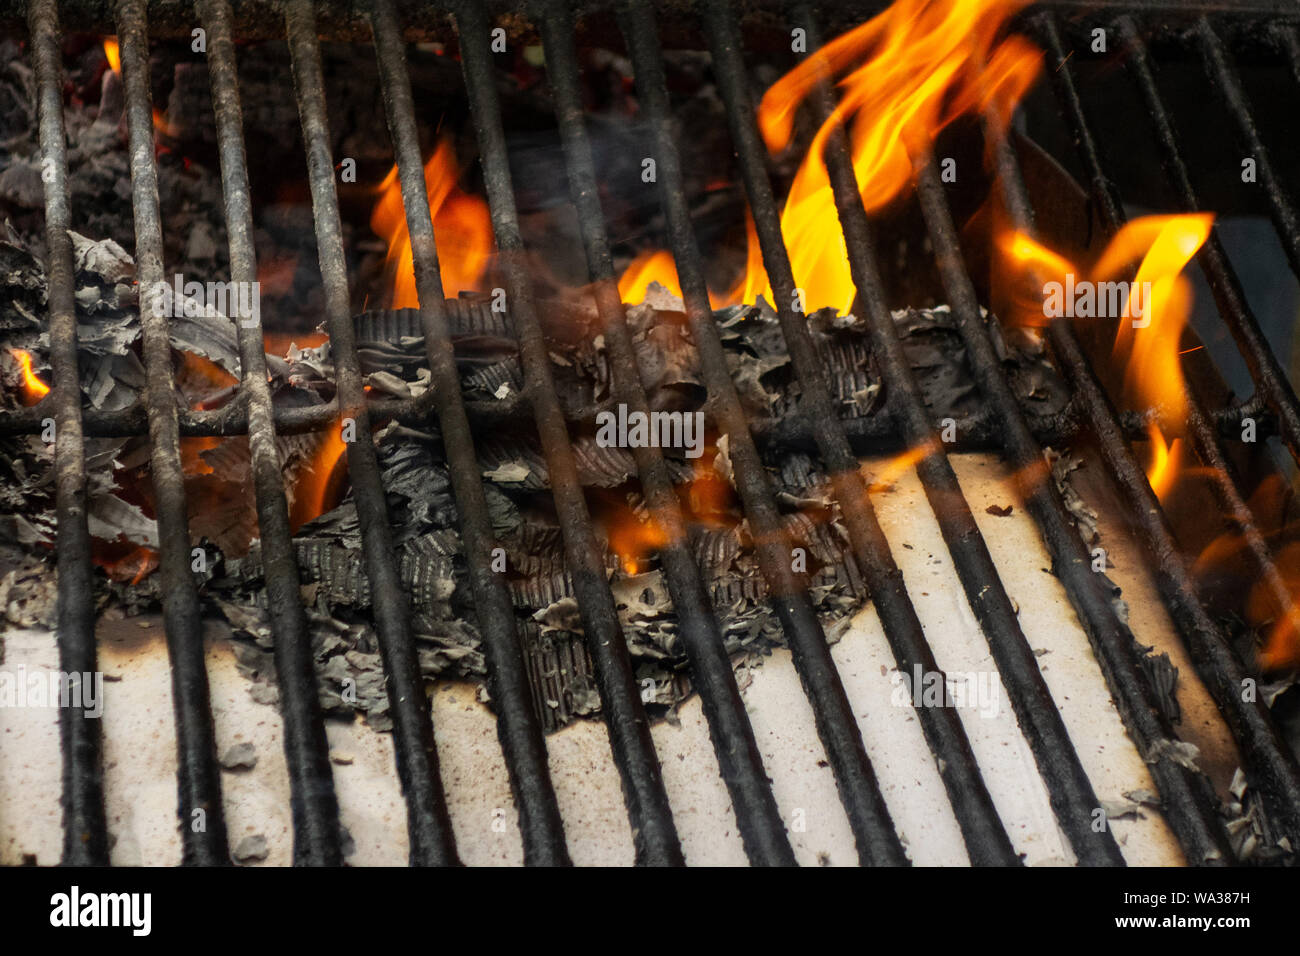 Wire rack on fireplace. Flame, burning paper and ash close up image. Concept of the brevity of life Stock Photo